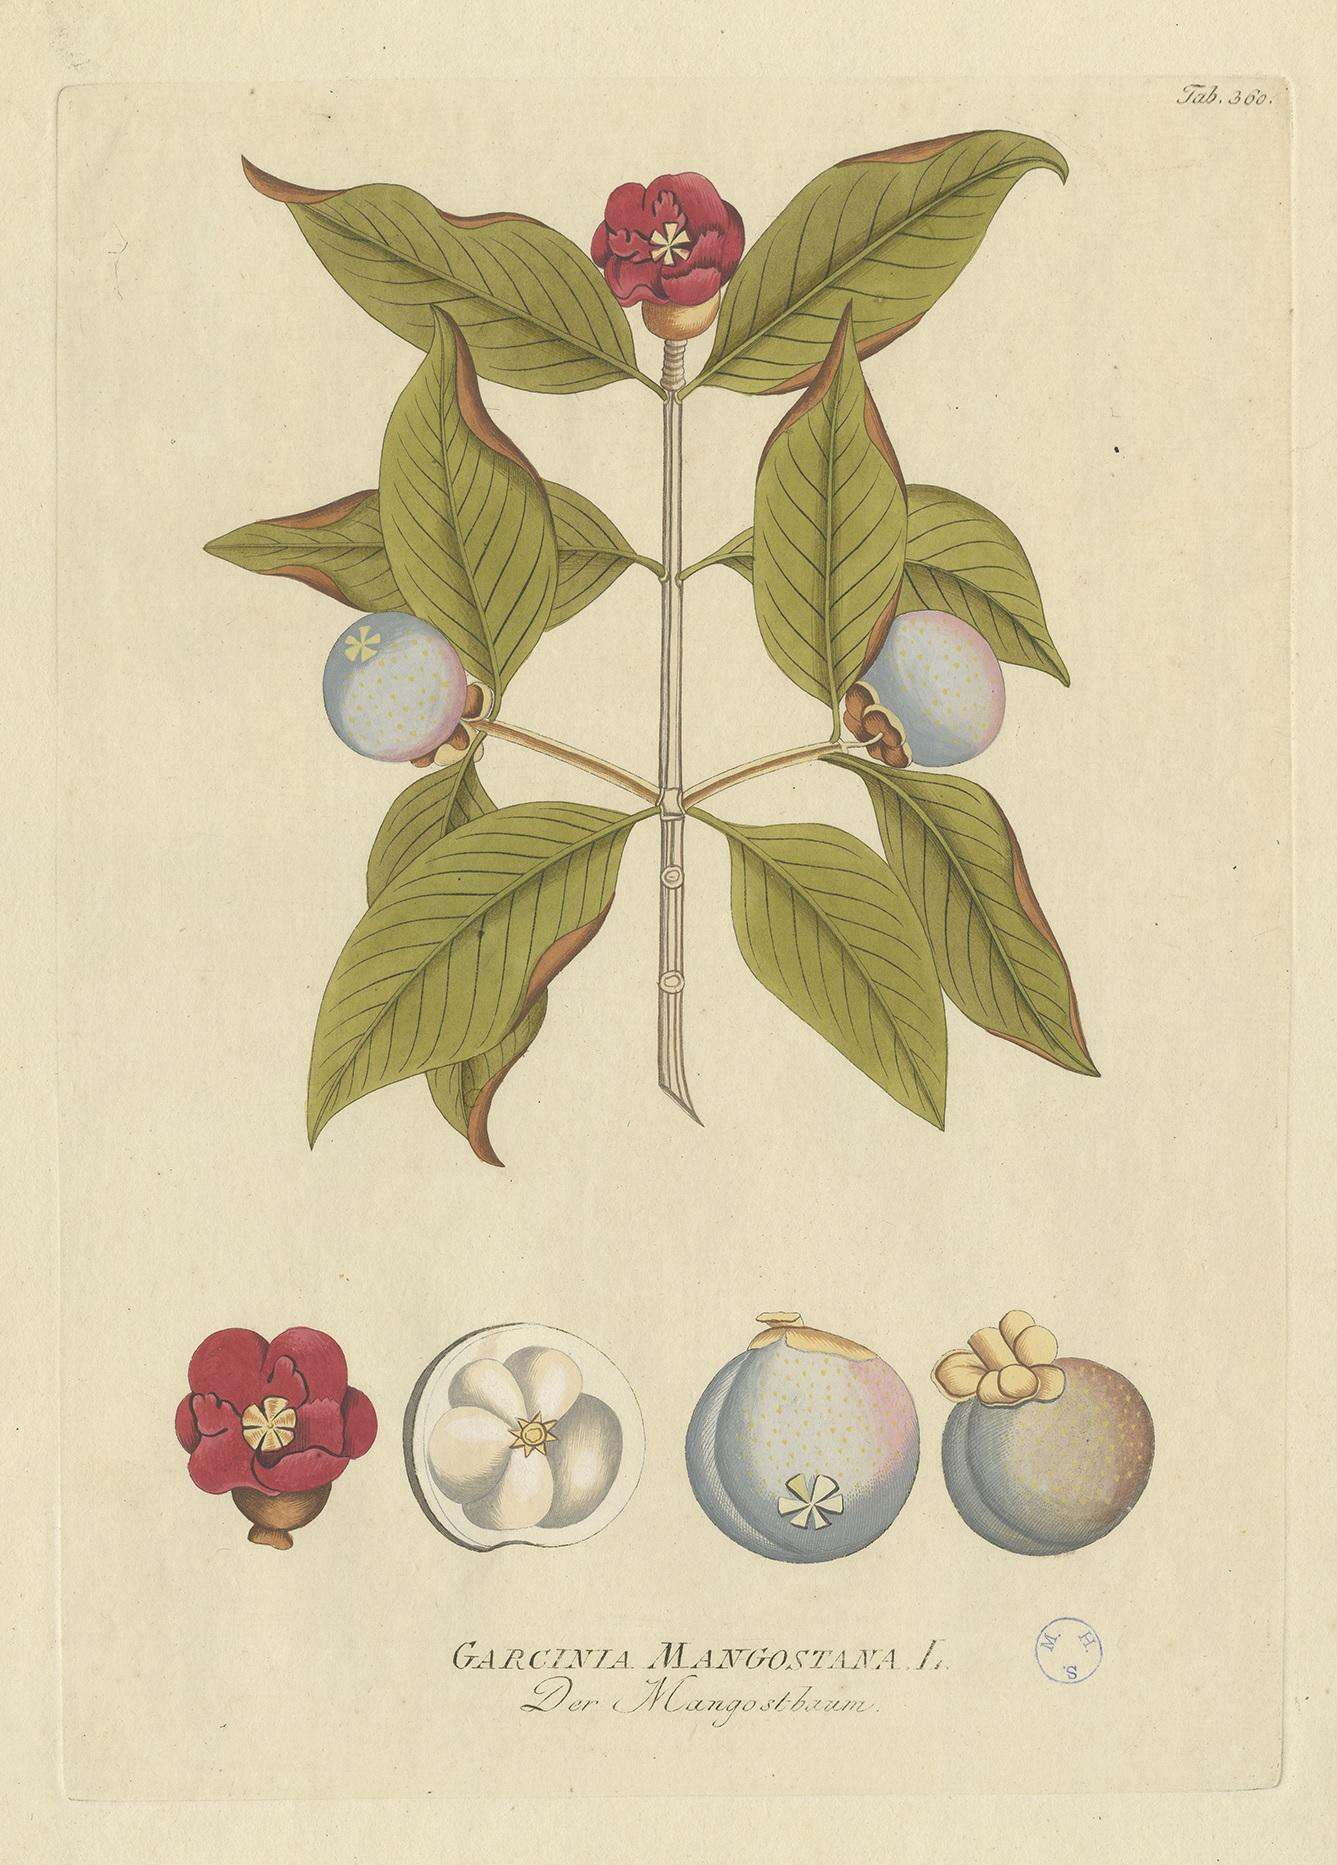 Antique botany print titled 'Garcinia Mangostana'. Hand colored engraving of a mangosteen tree. This print originates from 'Icones Plantarum Medicinalium (..)' by Joseph Jacob Plenck. Published between 1788 and 1803.